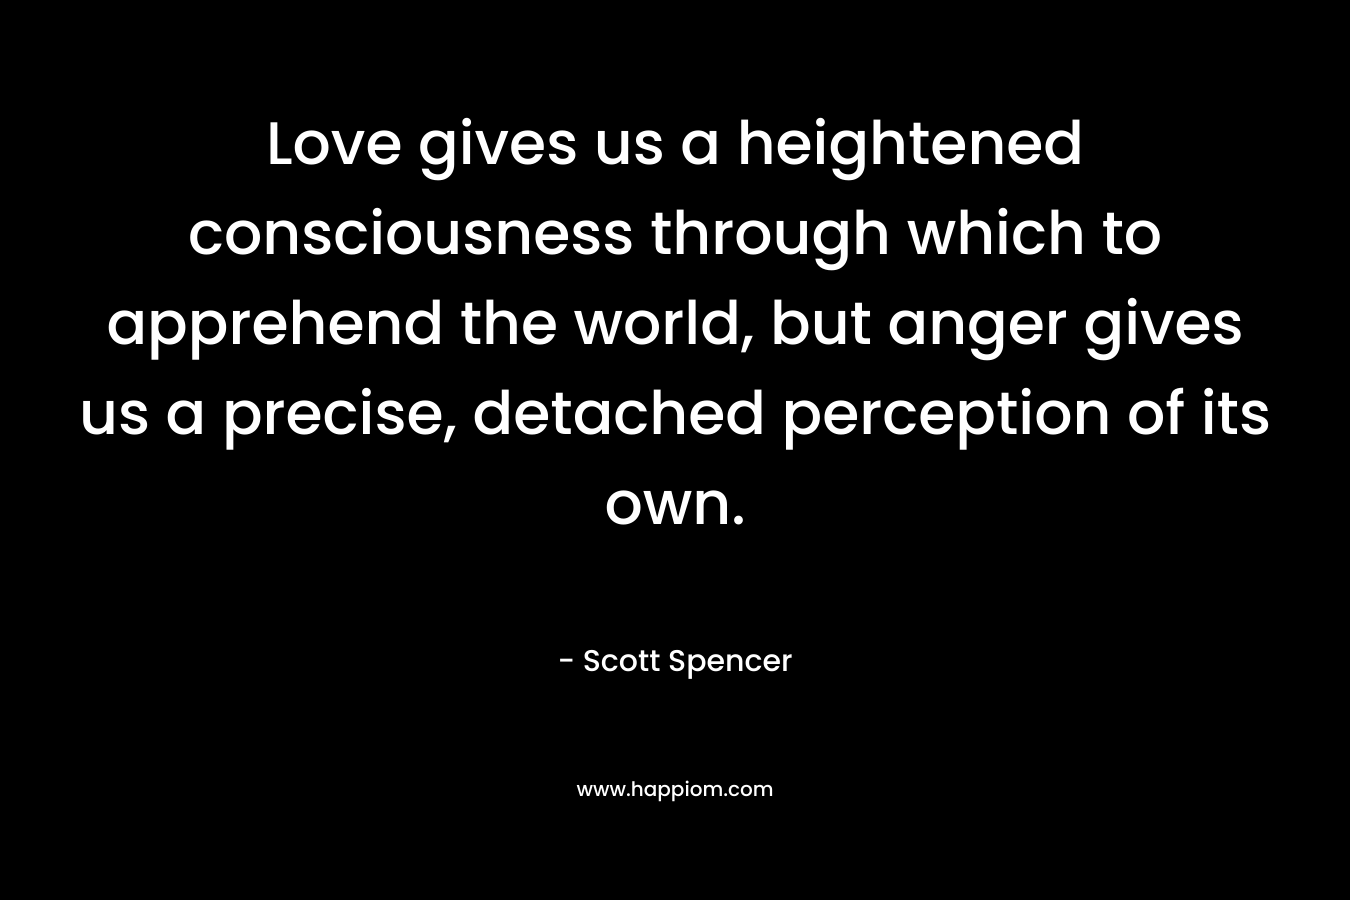 Love gives us a heightened consciousness through which to apprehend the world, but anger gives us a precise, detached perception of its own. – Scott Spencer